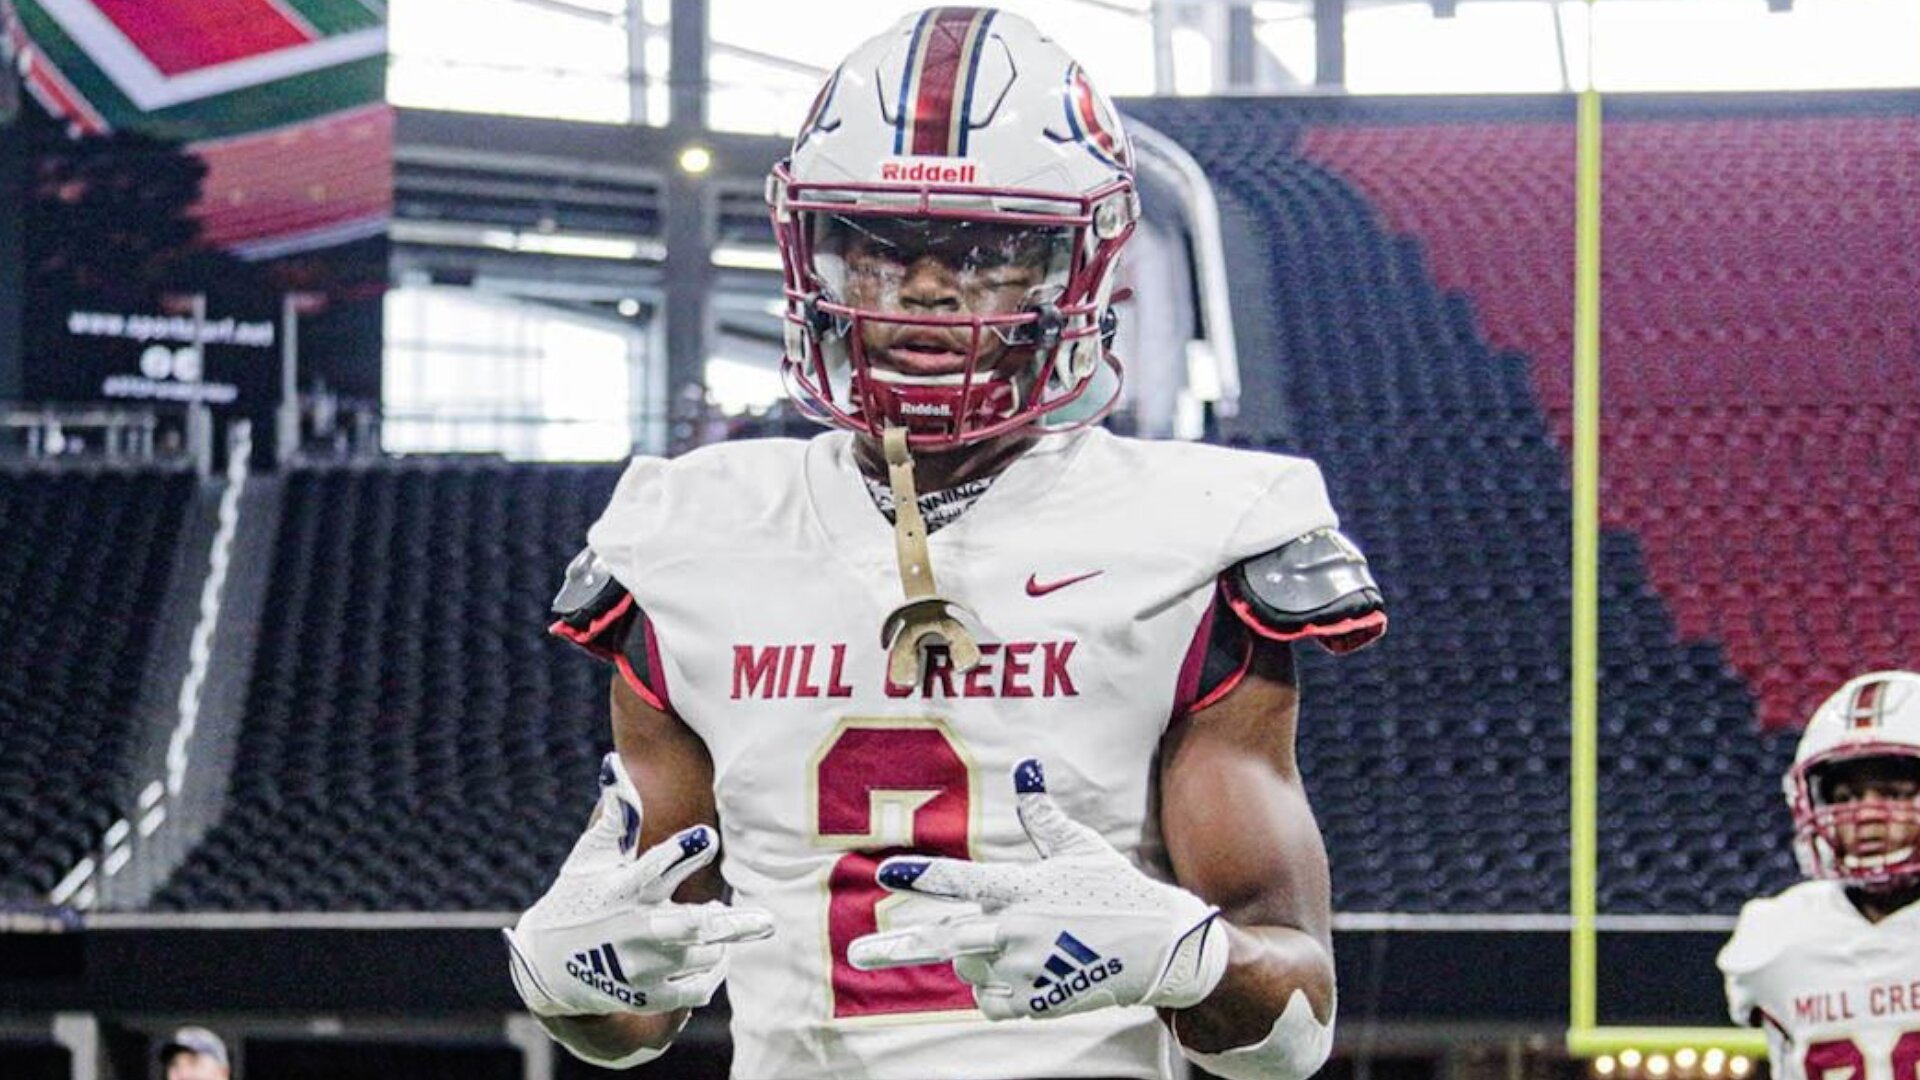 Mill Creek's Jamal Anderson, son of former Falcons running back